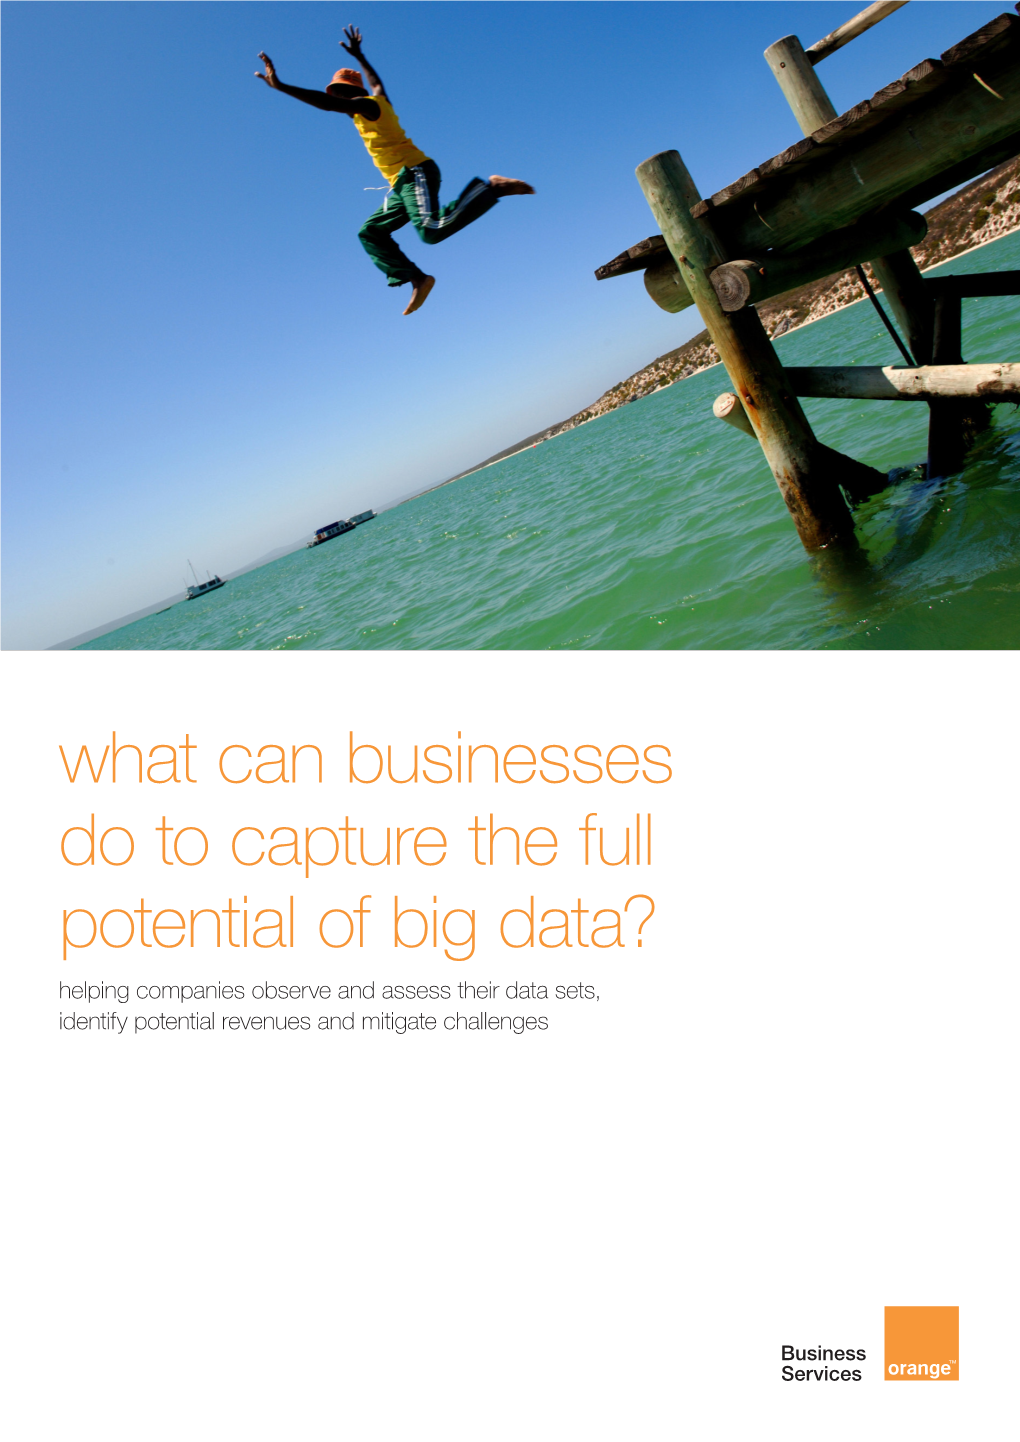 What Can Businesses Do to Capture the Full